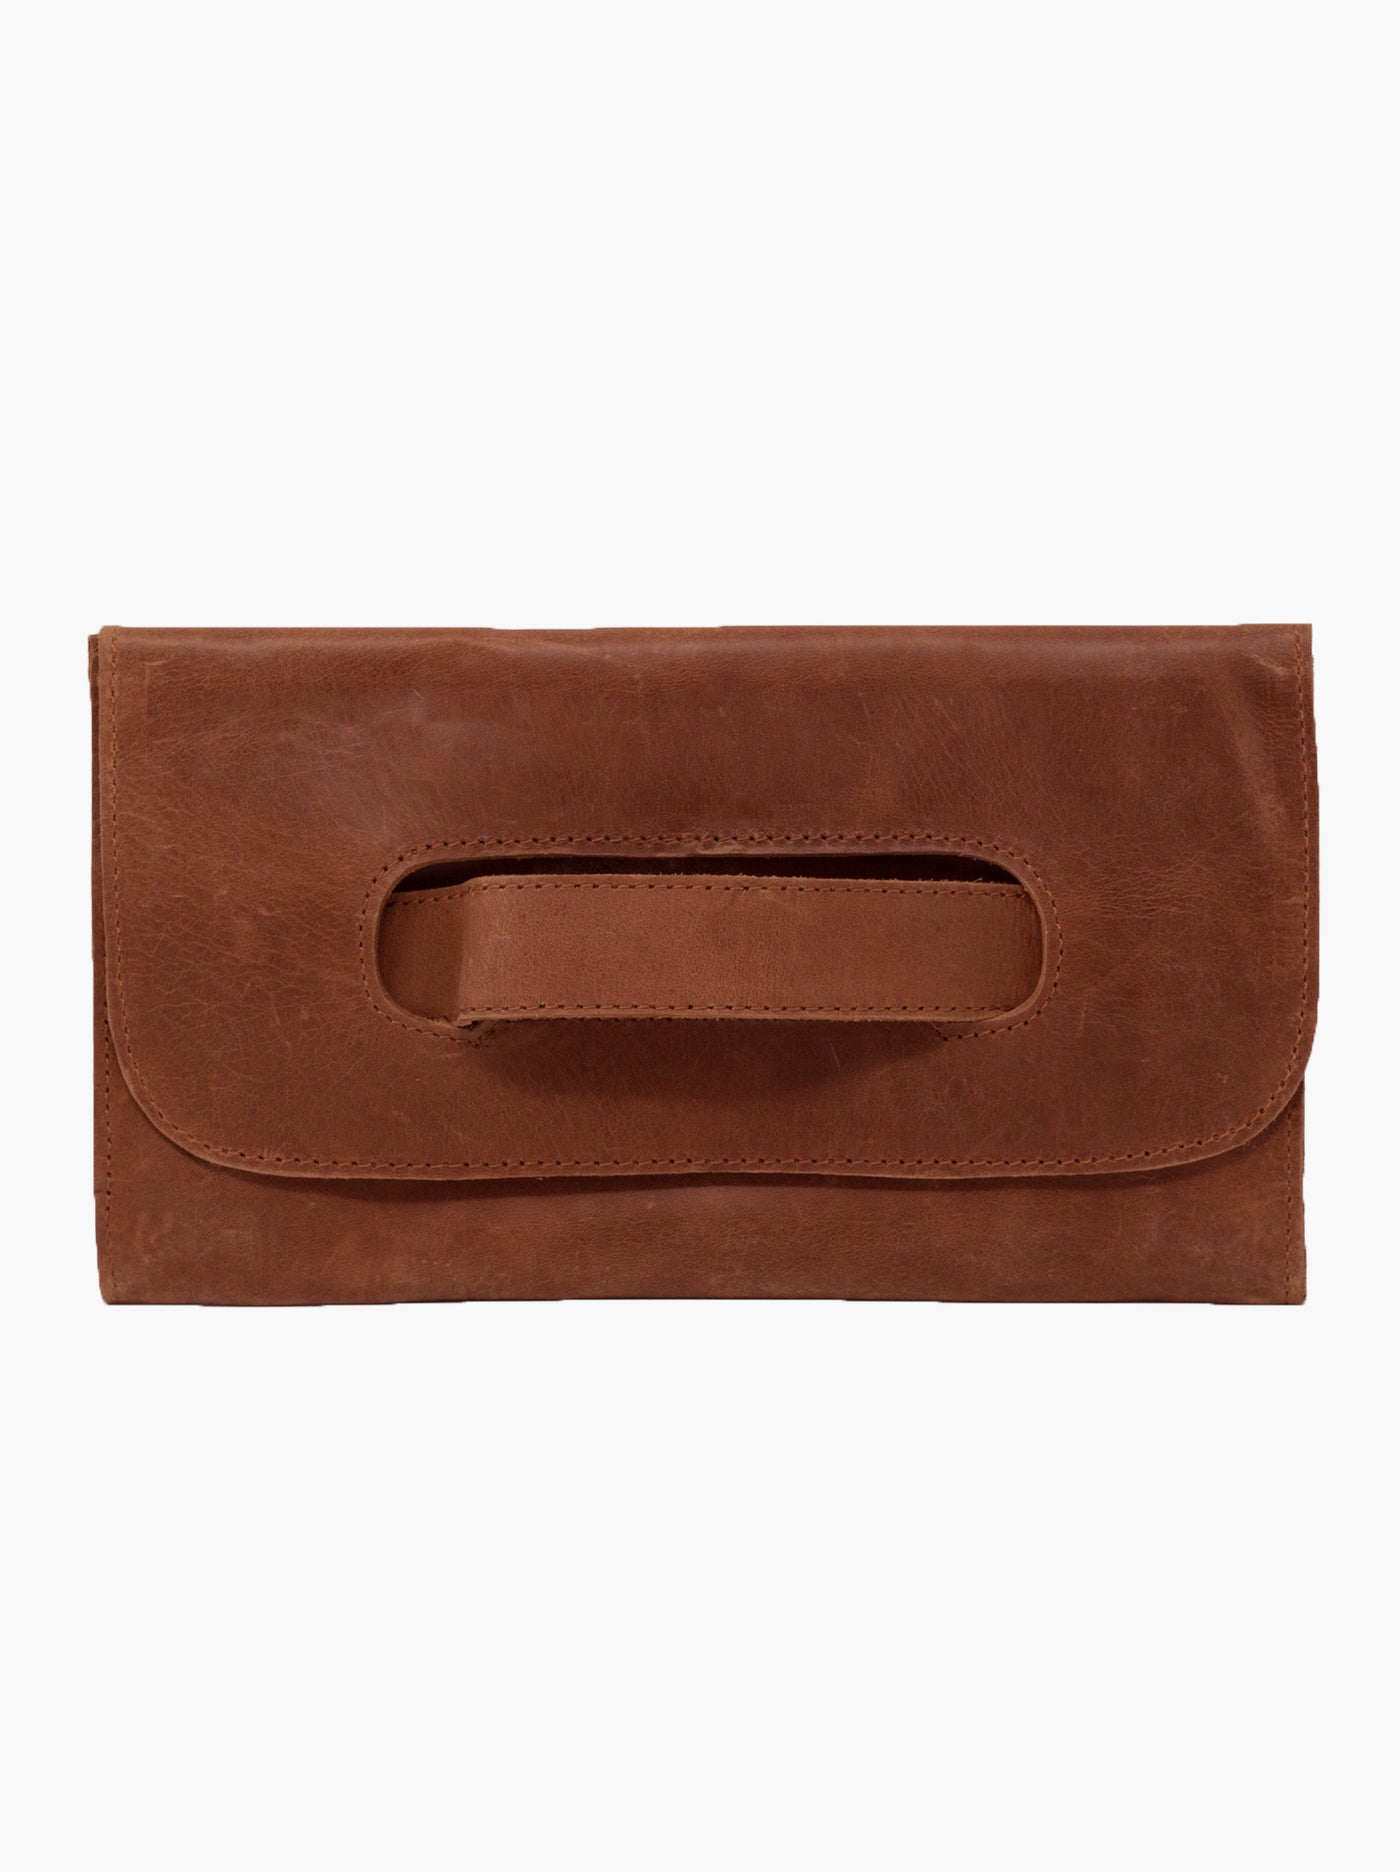 Able Mare Handle Clutch- Whiskey